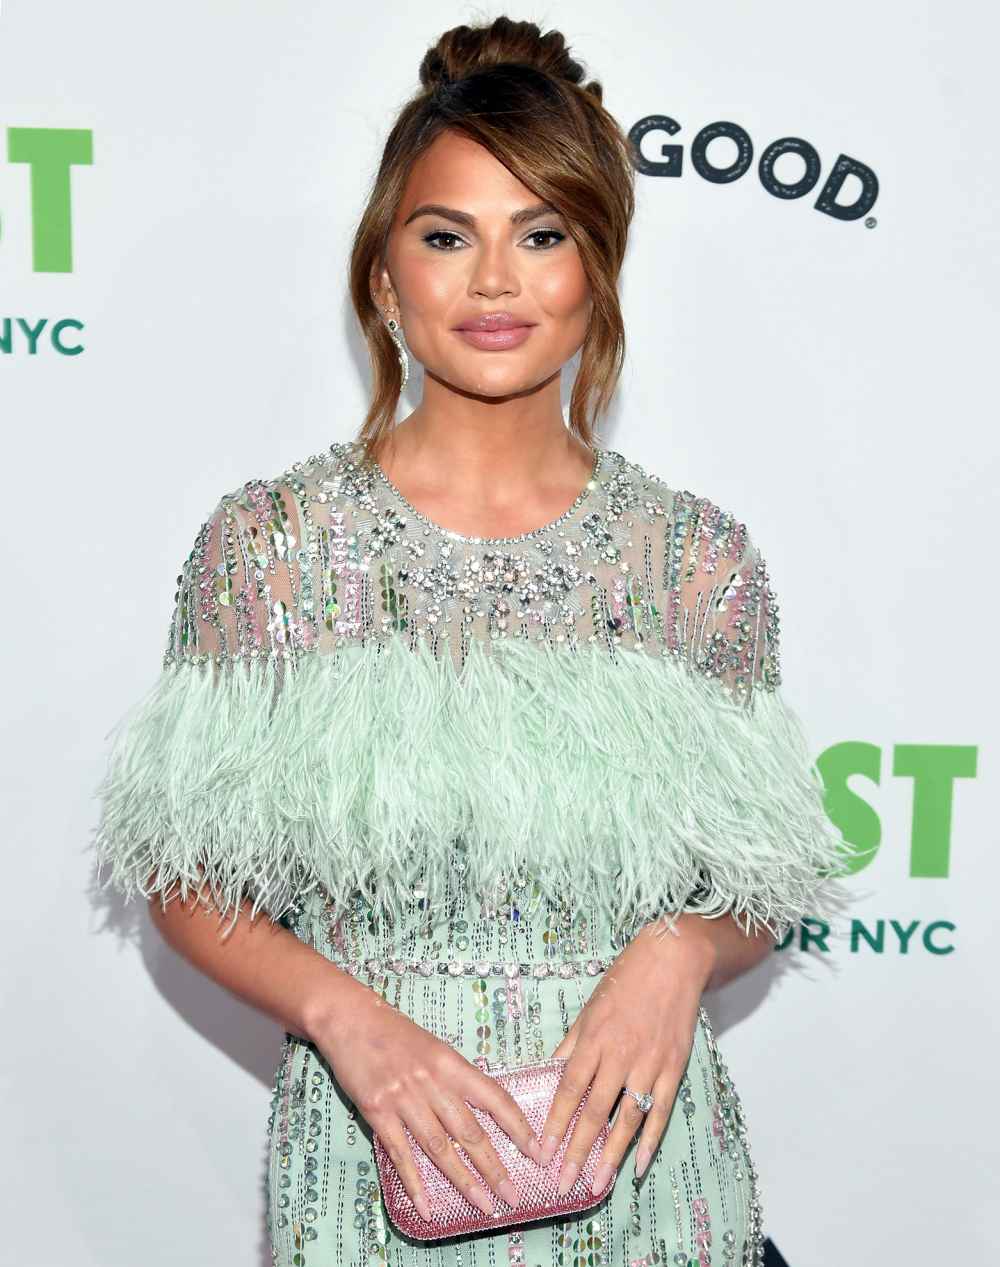 All About Chrissy Teigen's New Baby Via Surrogate And Kids